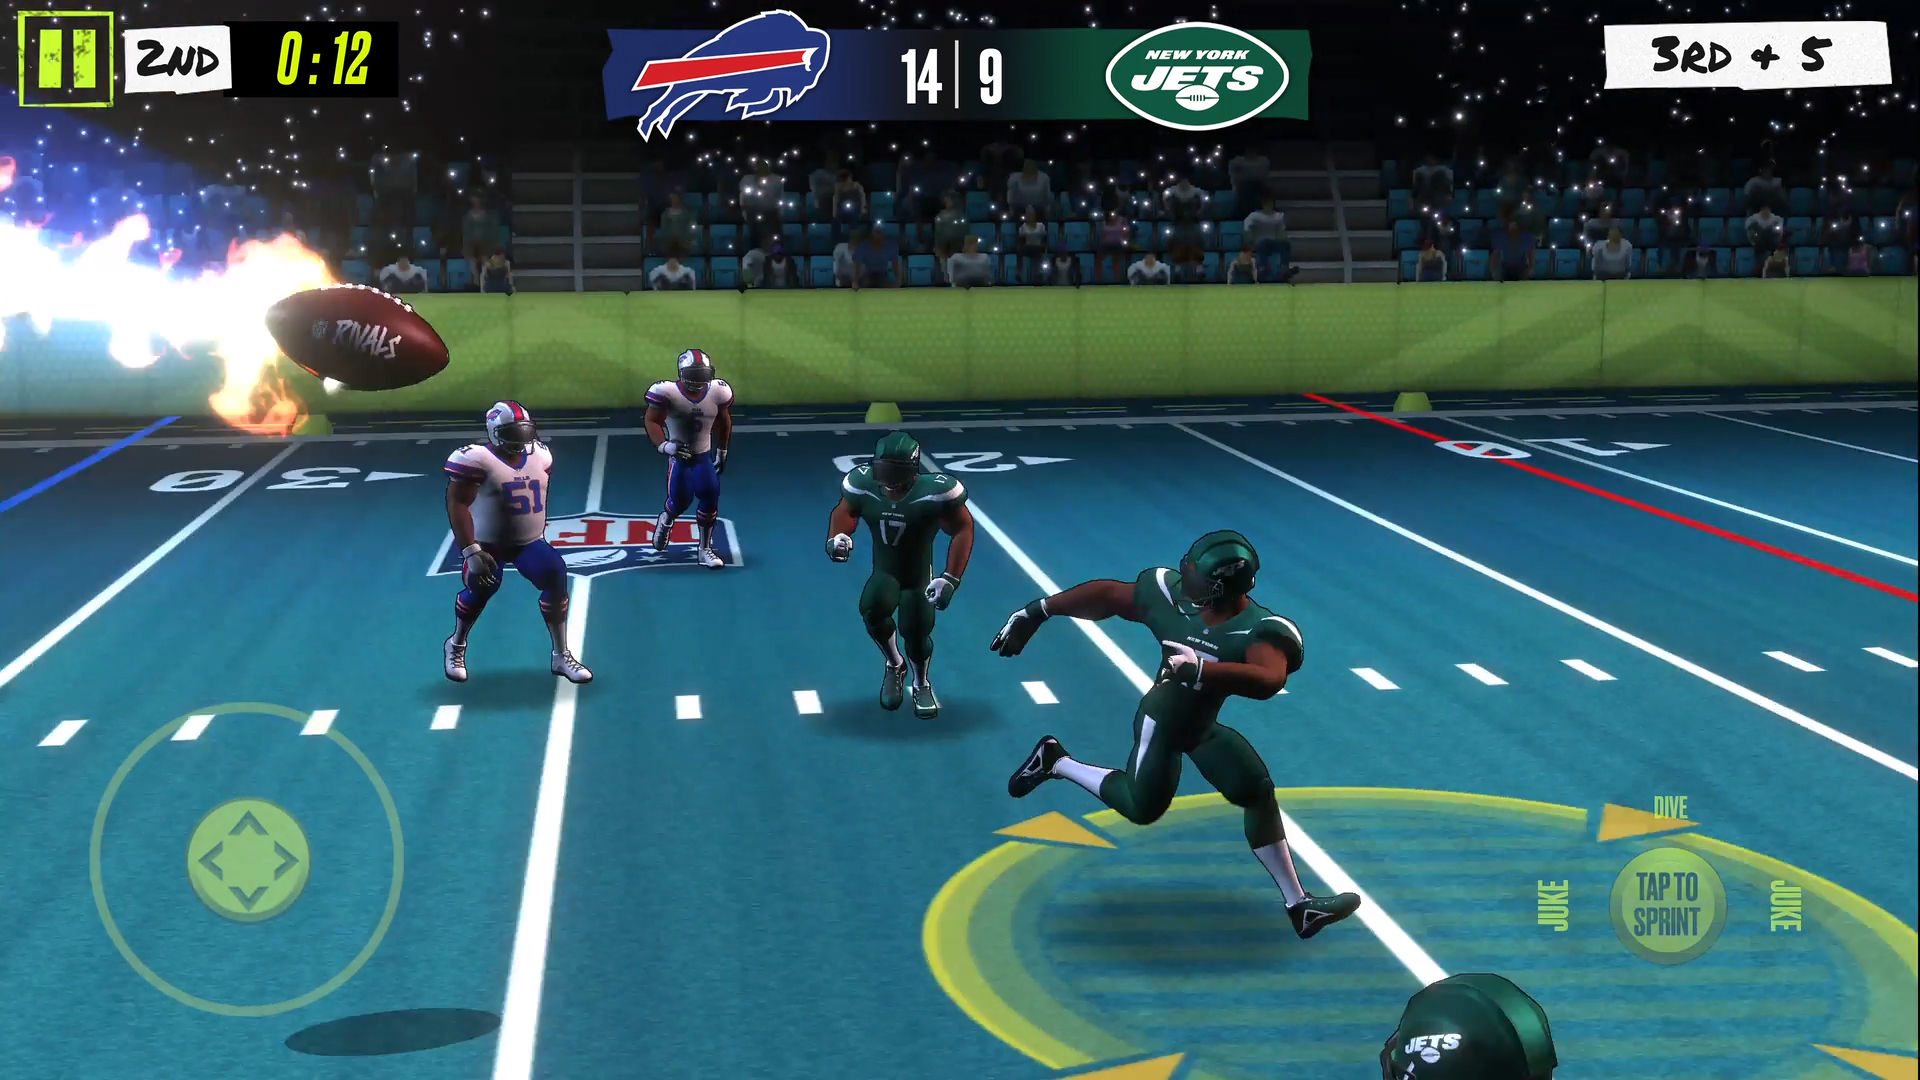 Kick off the NFL Season With NFL Rivals, as the Officially Licensed NFL and NFLPA Mobile Game Launches Worldwide